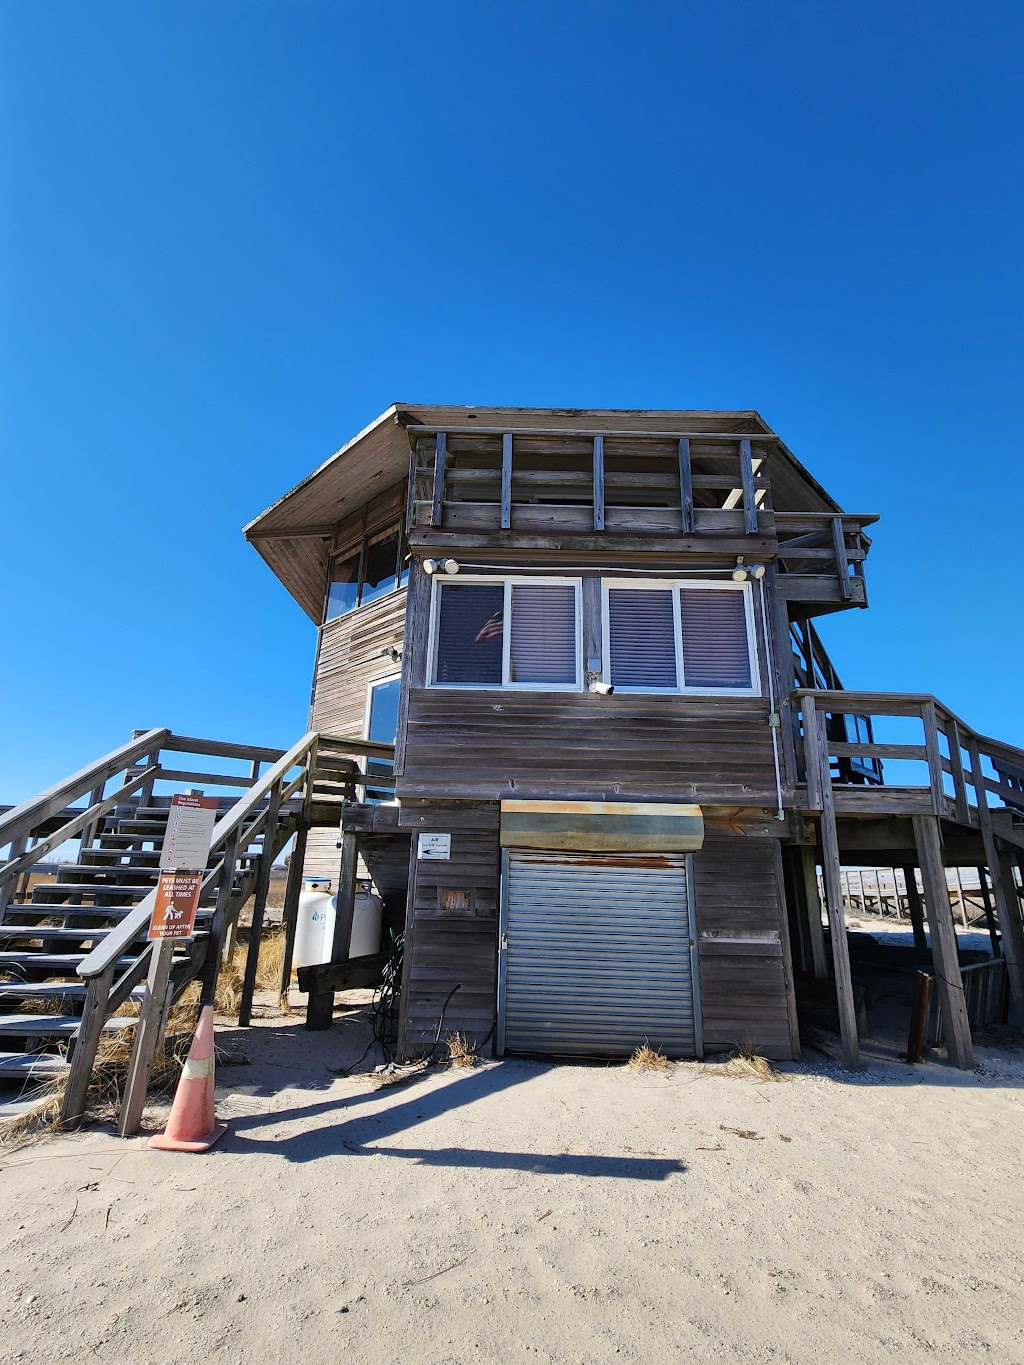 Fire Island Wilderness Visitor Center | County Rd 46, Shirley, NY 11967 | Phone: (631) 281-3010